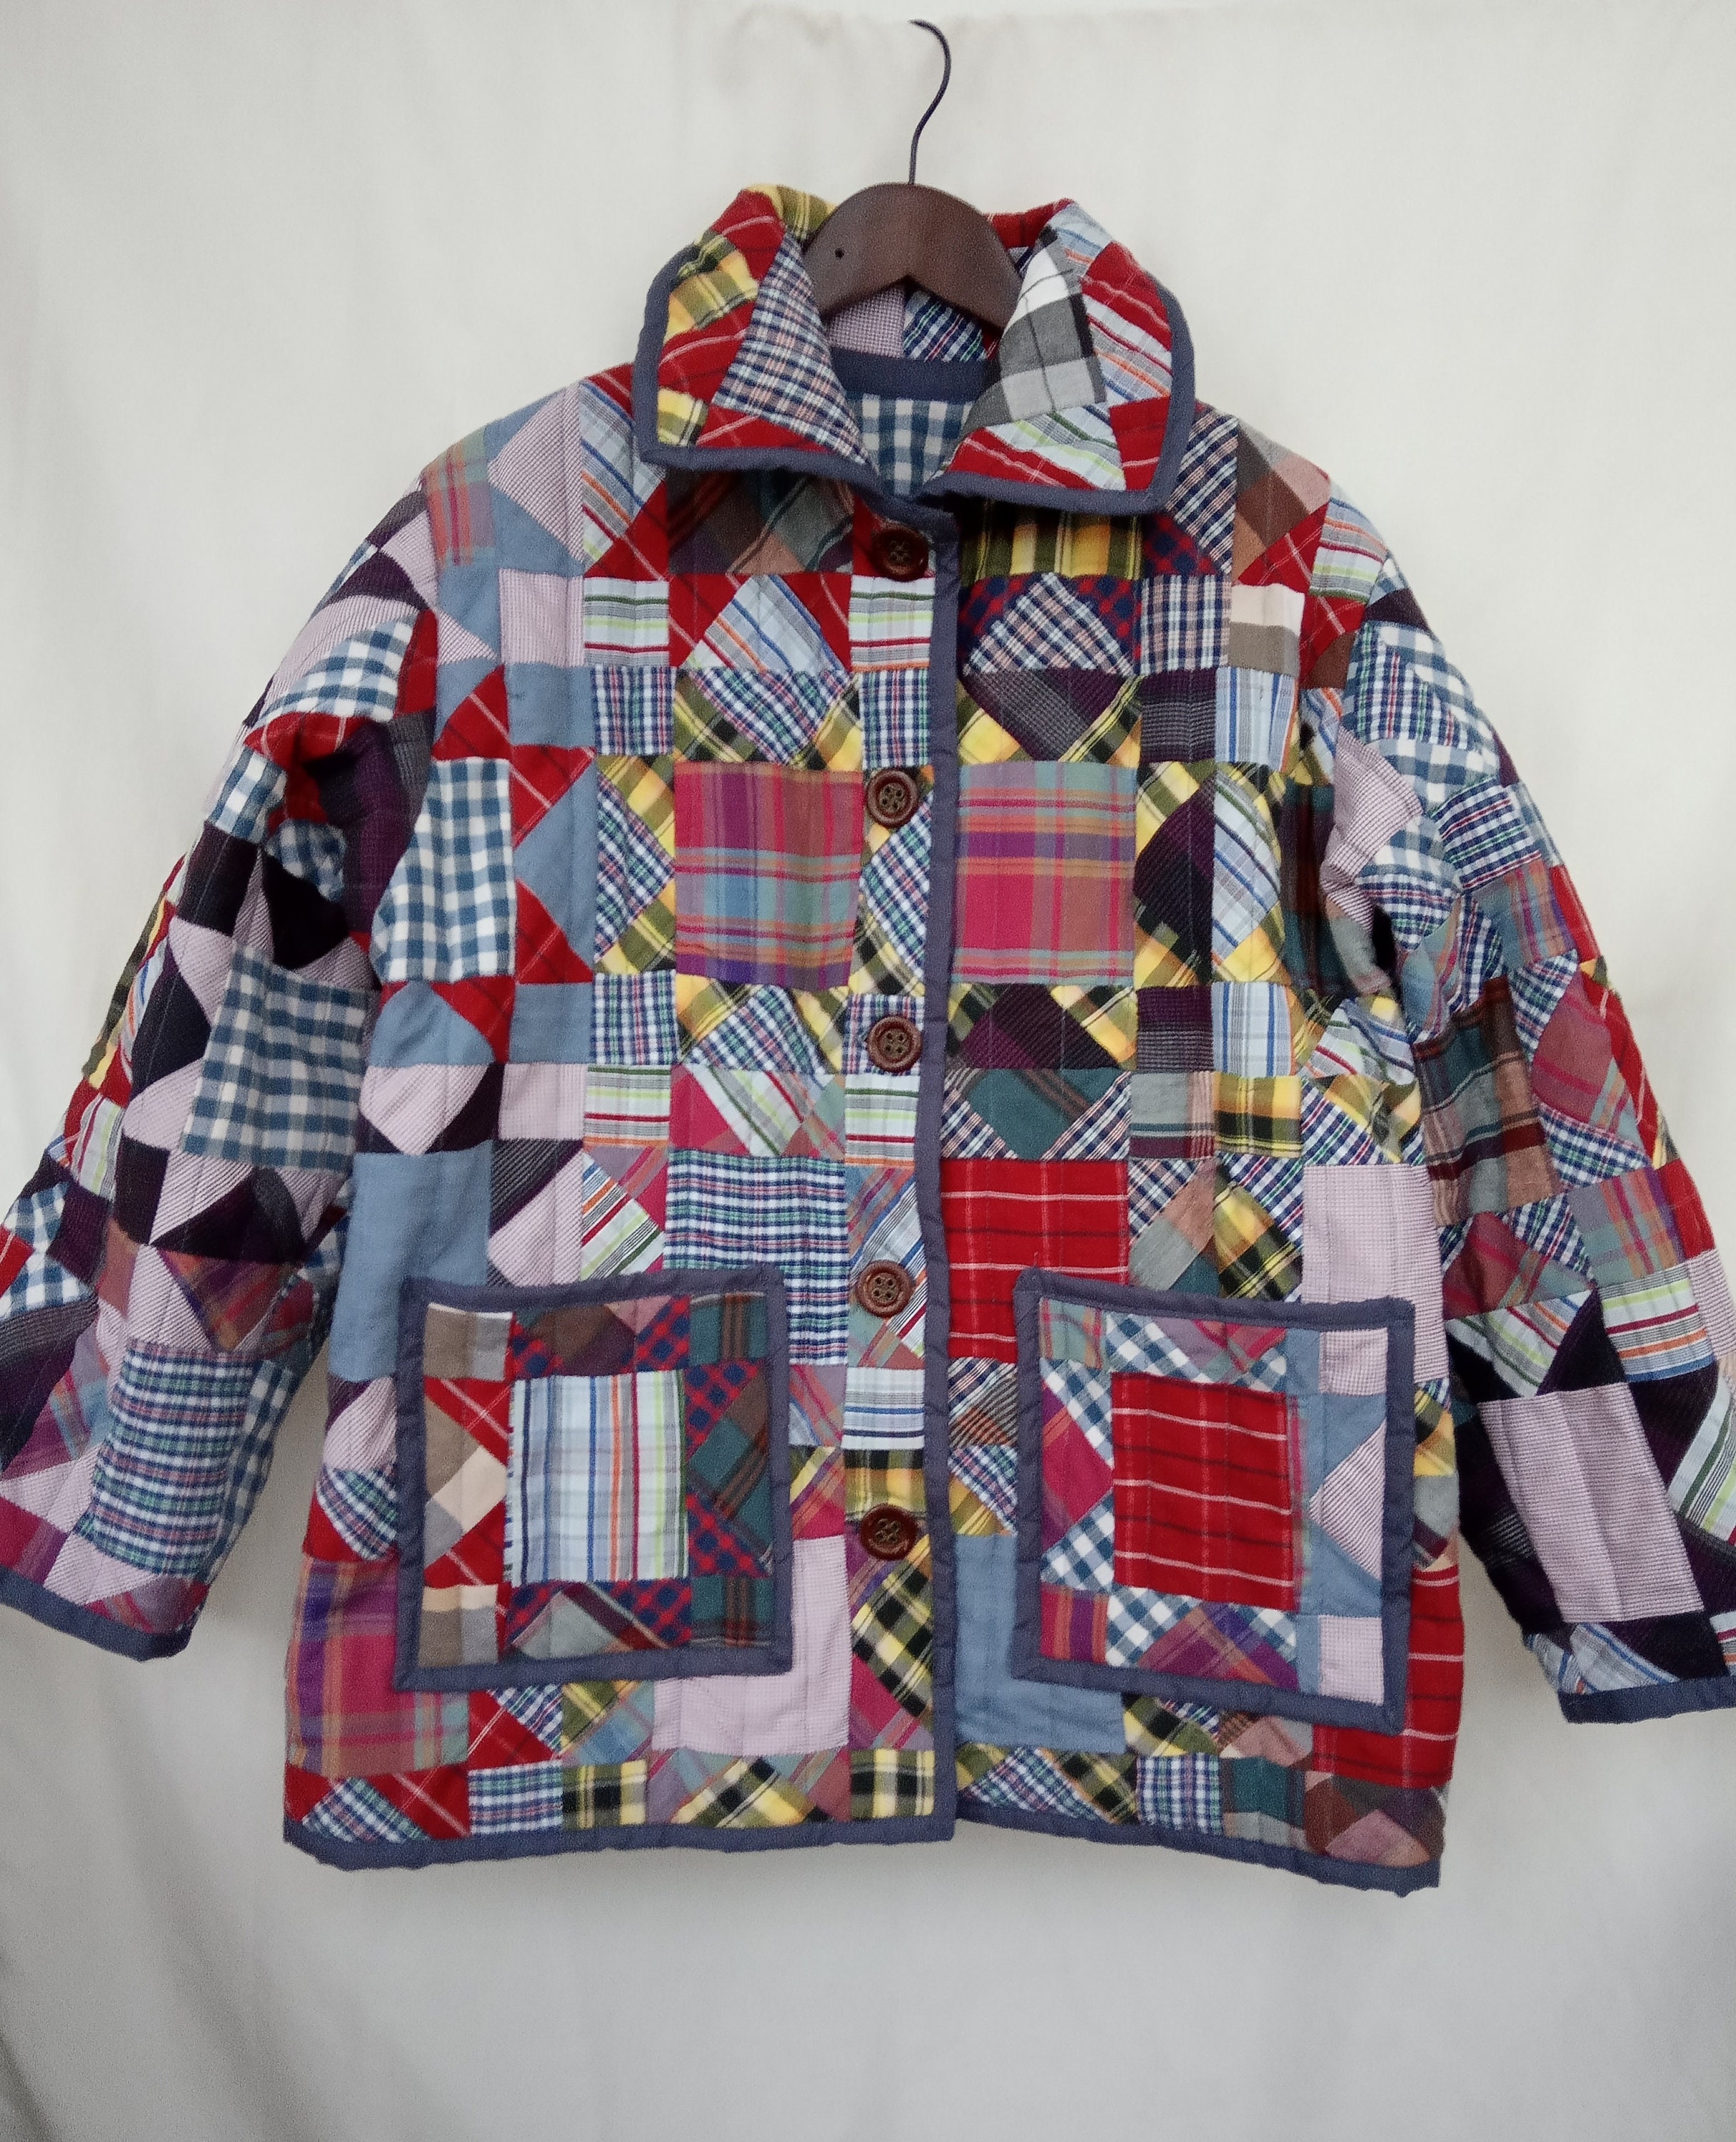 Patchwork Quilted Jacket Cotton Fabric Quilt Coat Patchwork - Etsy